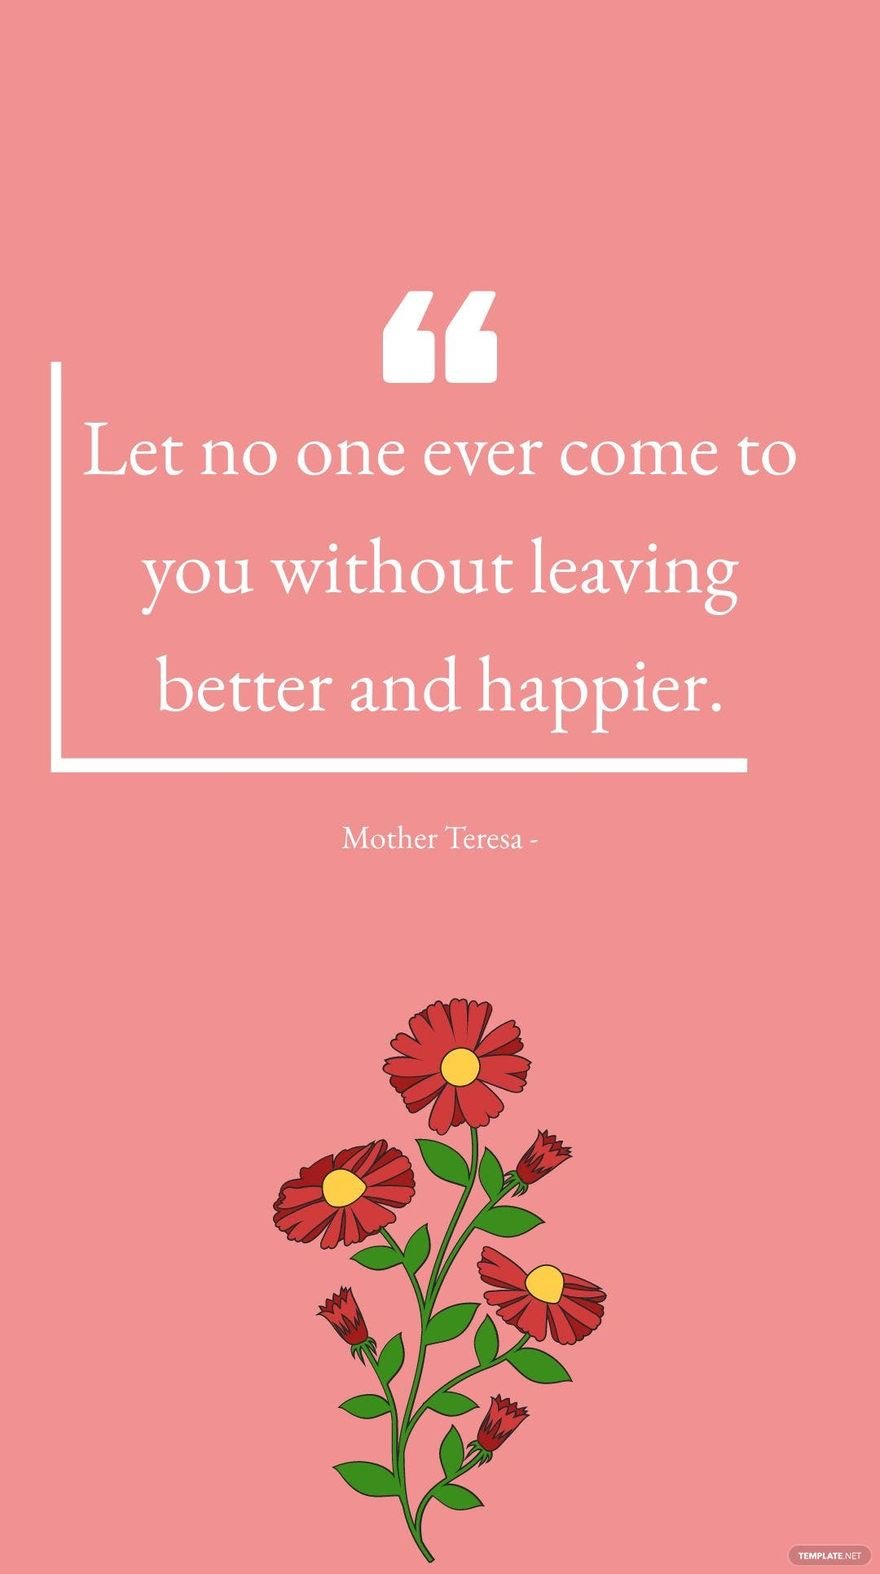 Mother Teresa - Let no one ever come to you without leaving better and happier.